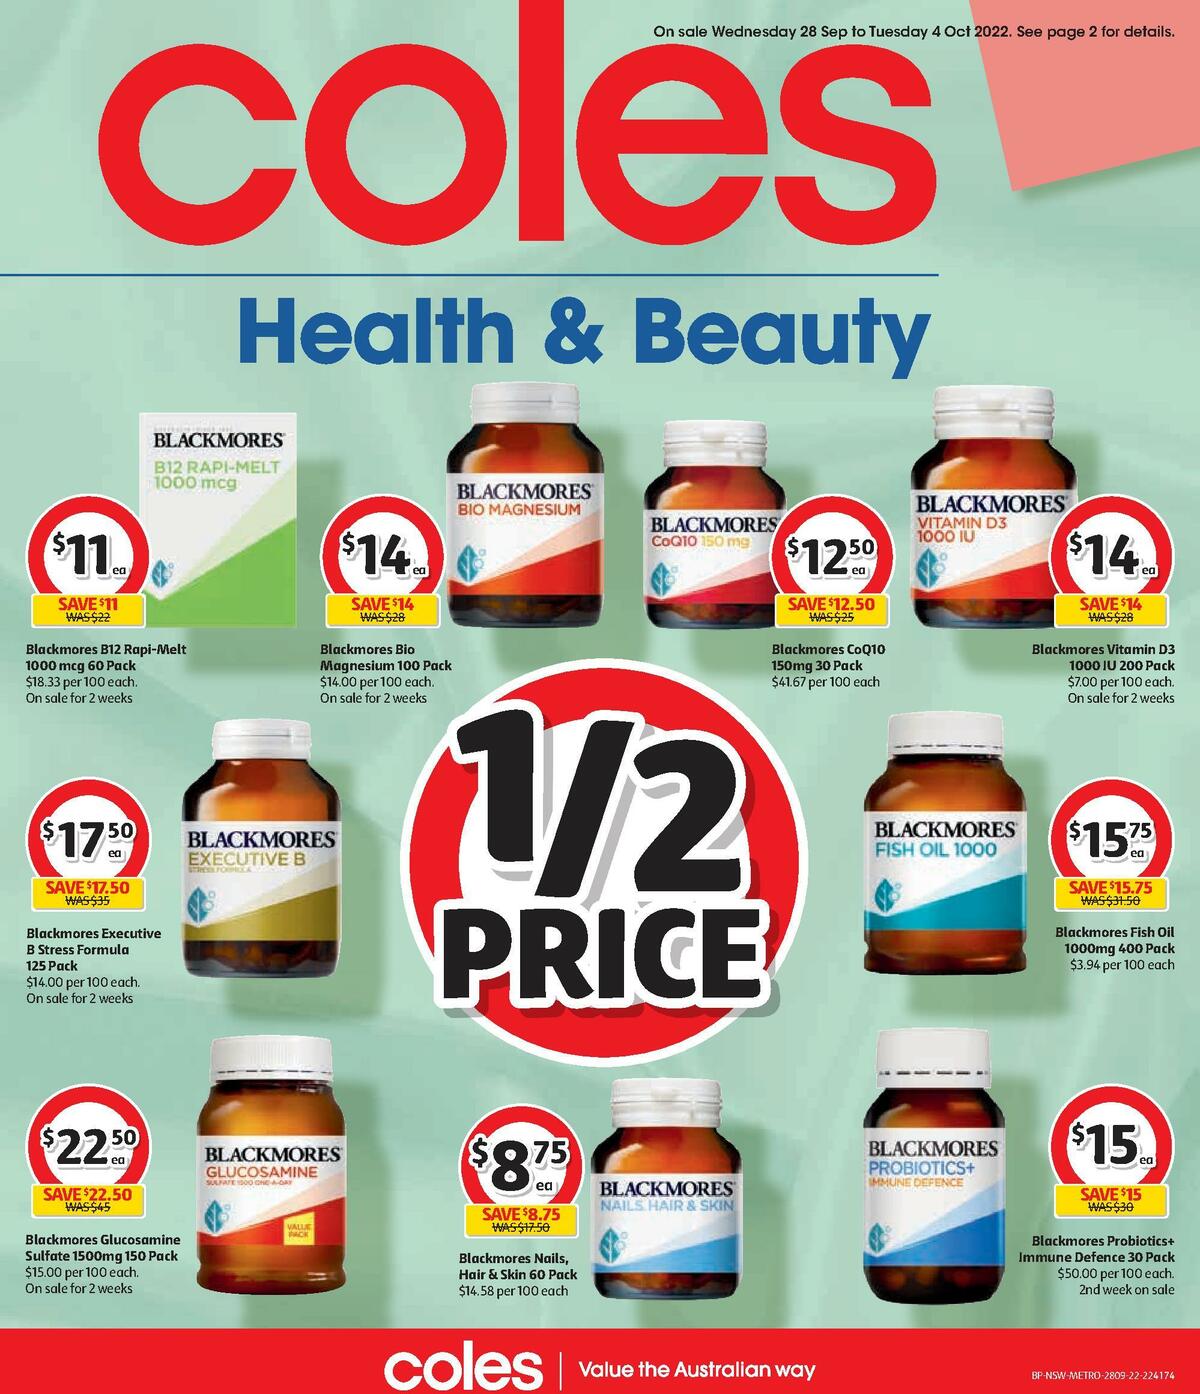 Coles Health & Beauty Catalogues from 28 September